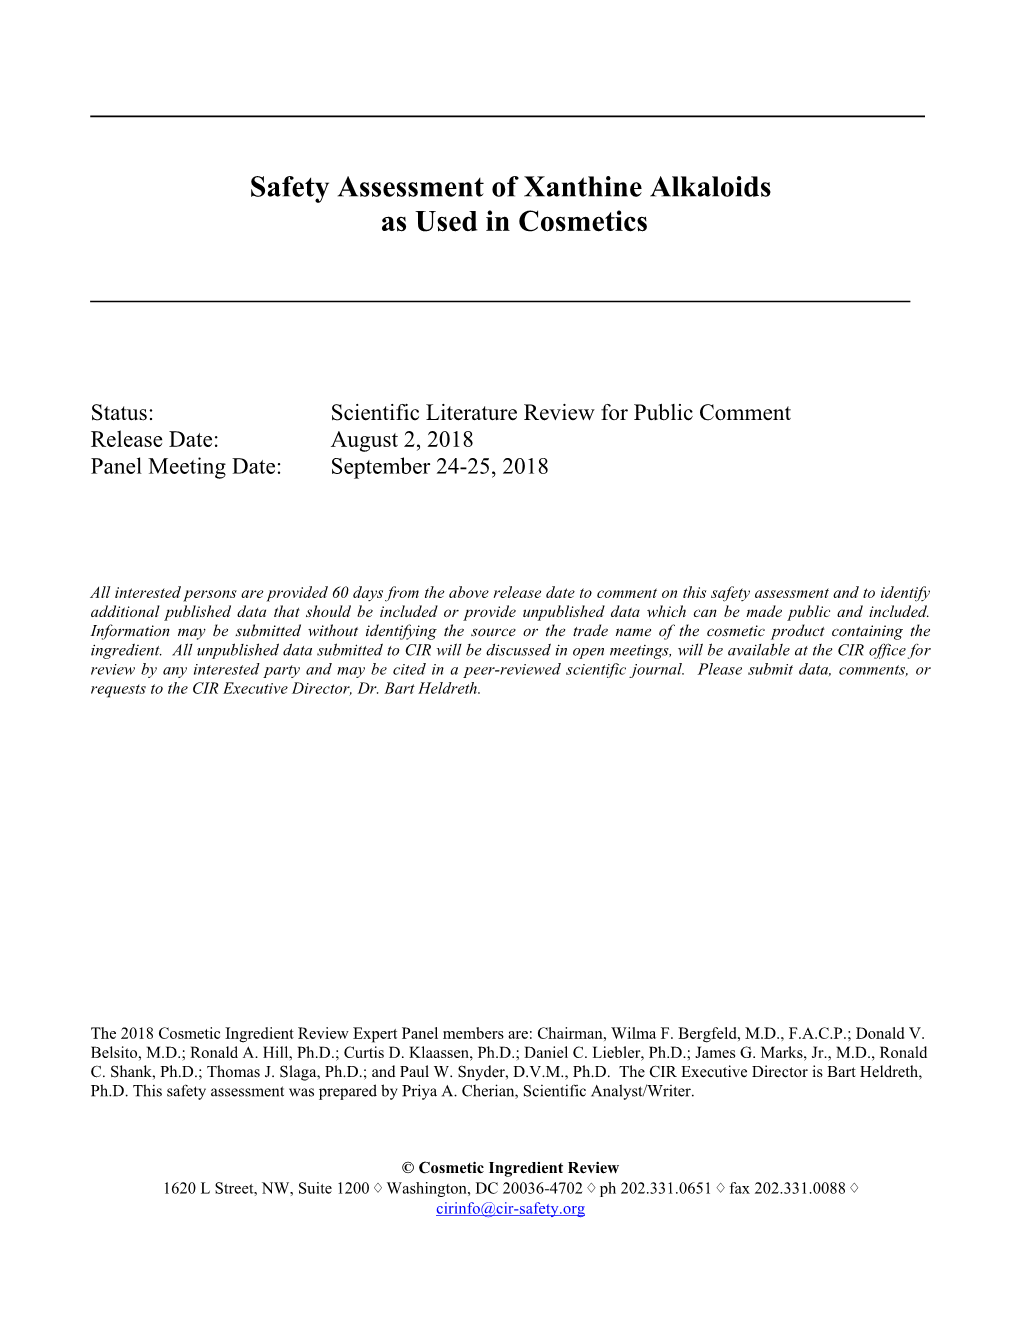 Safety Assessment of Xanthine Alkaloids As Used in Cosmetics